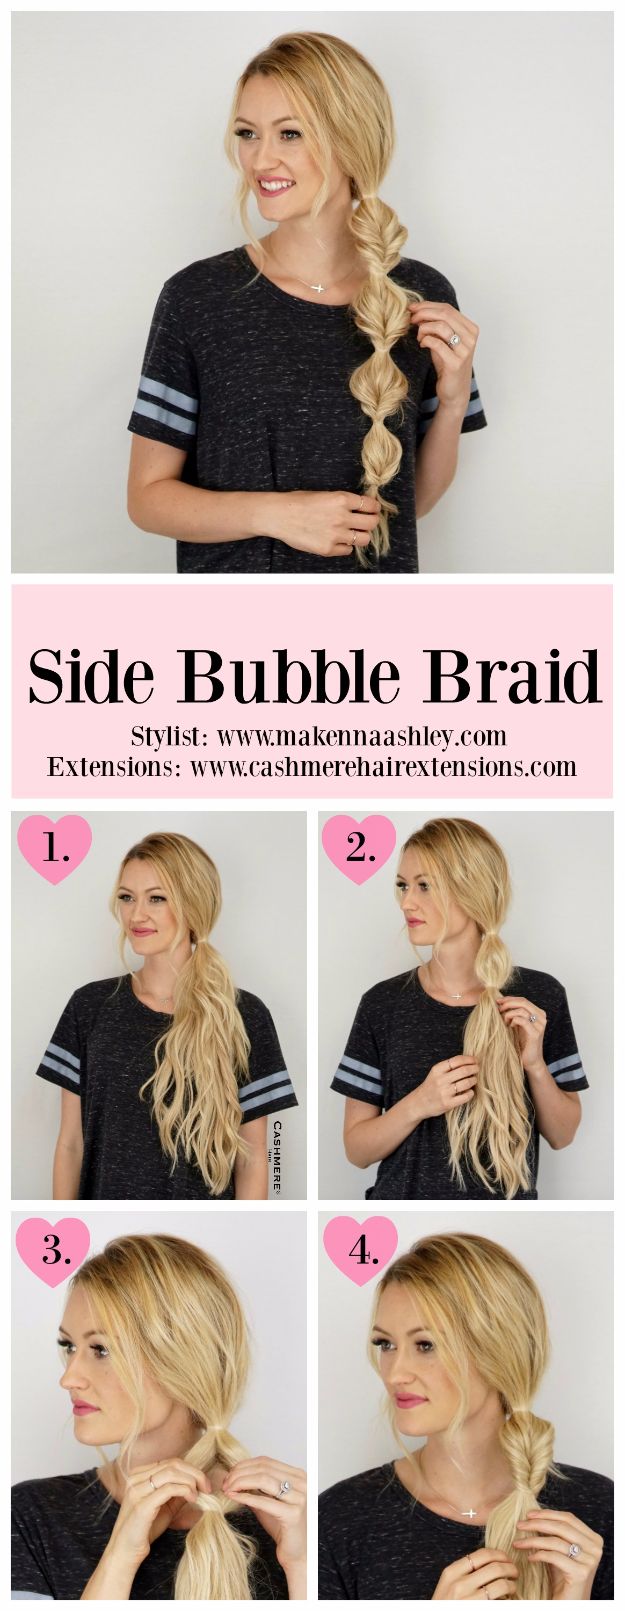 Easy Braids With Tutorials - Side Bubble Braid - Cute Braiding Tutorials for Teens, Girls and Women - Easy Step by Step Braid Ideas - Quick Hairstyles for School - Creative Braids for Teenagers - Tutorial and Instructions for Hair Braiding